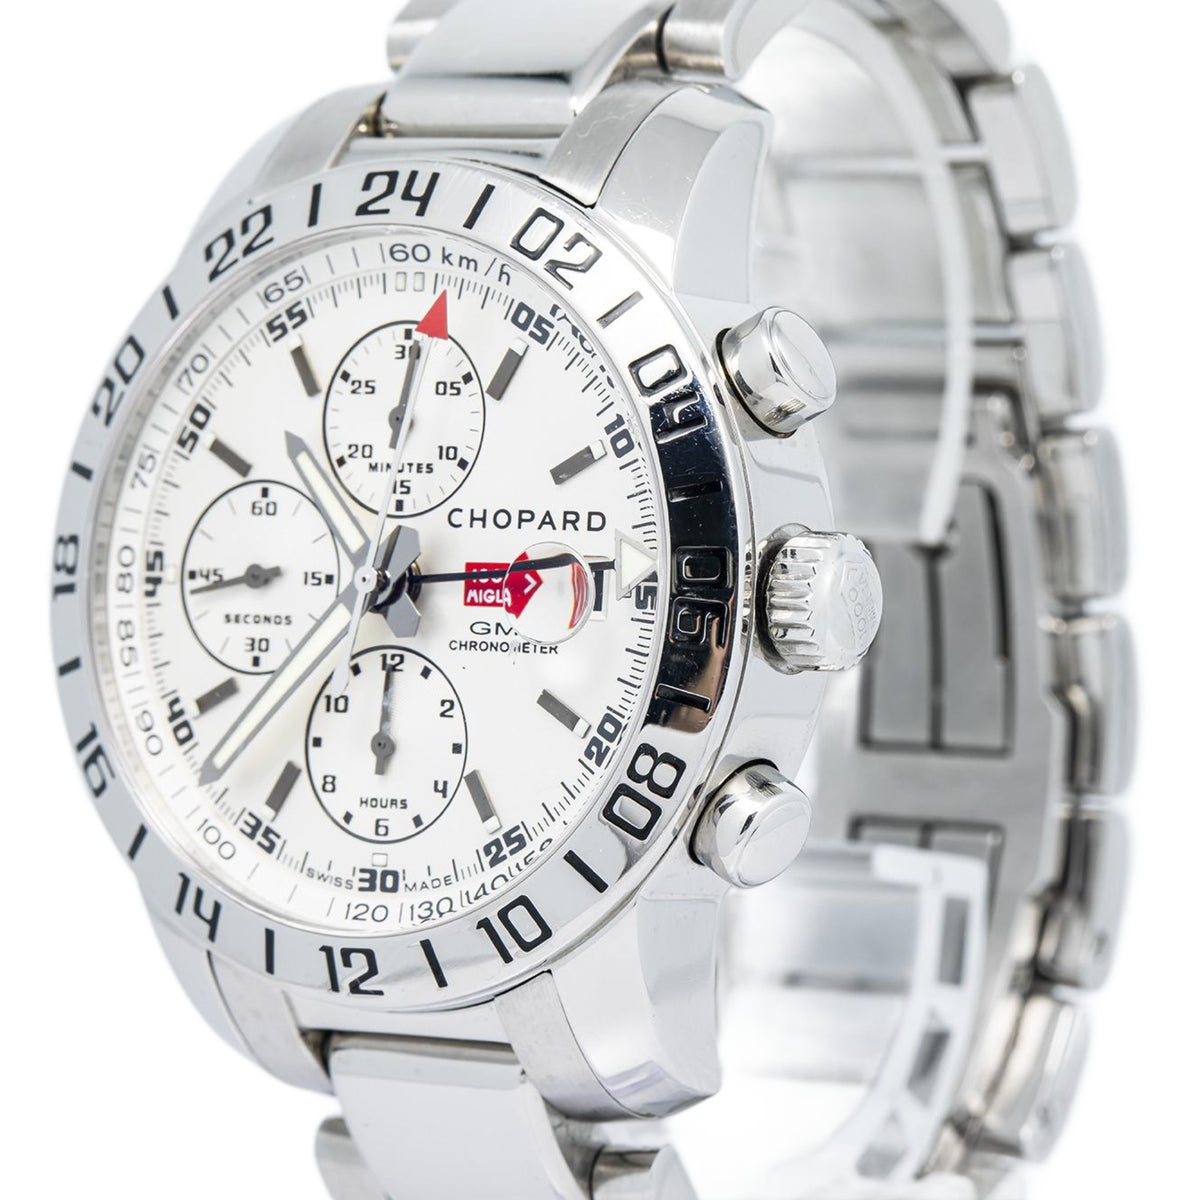 Chopard Mille Miglia 8992 GMT Chronograph Stainless Steel Auto Men's Watch 42mm